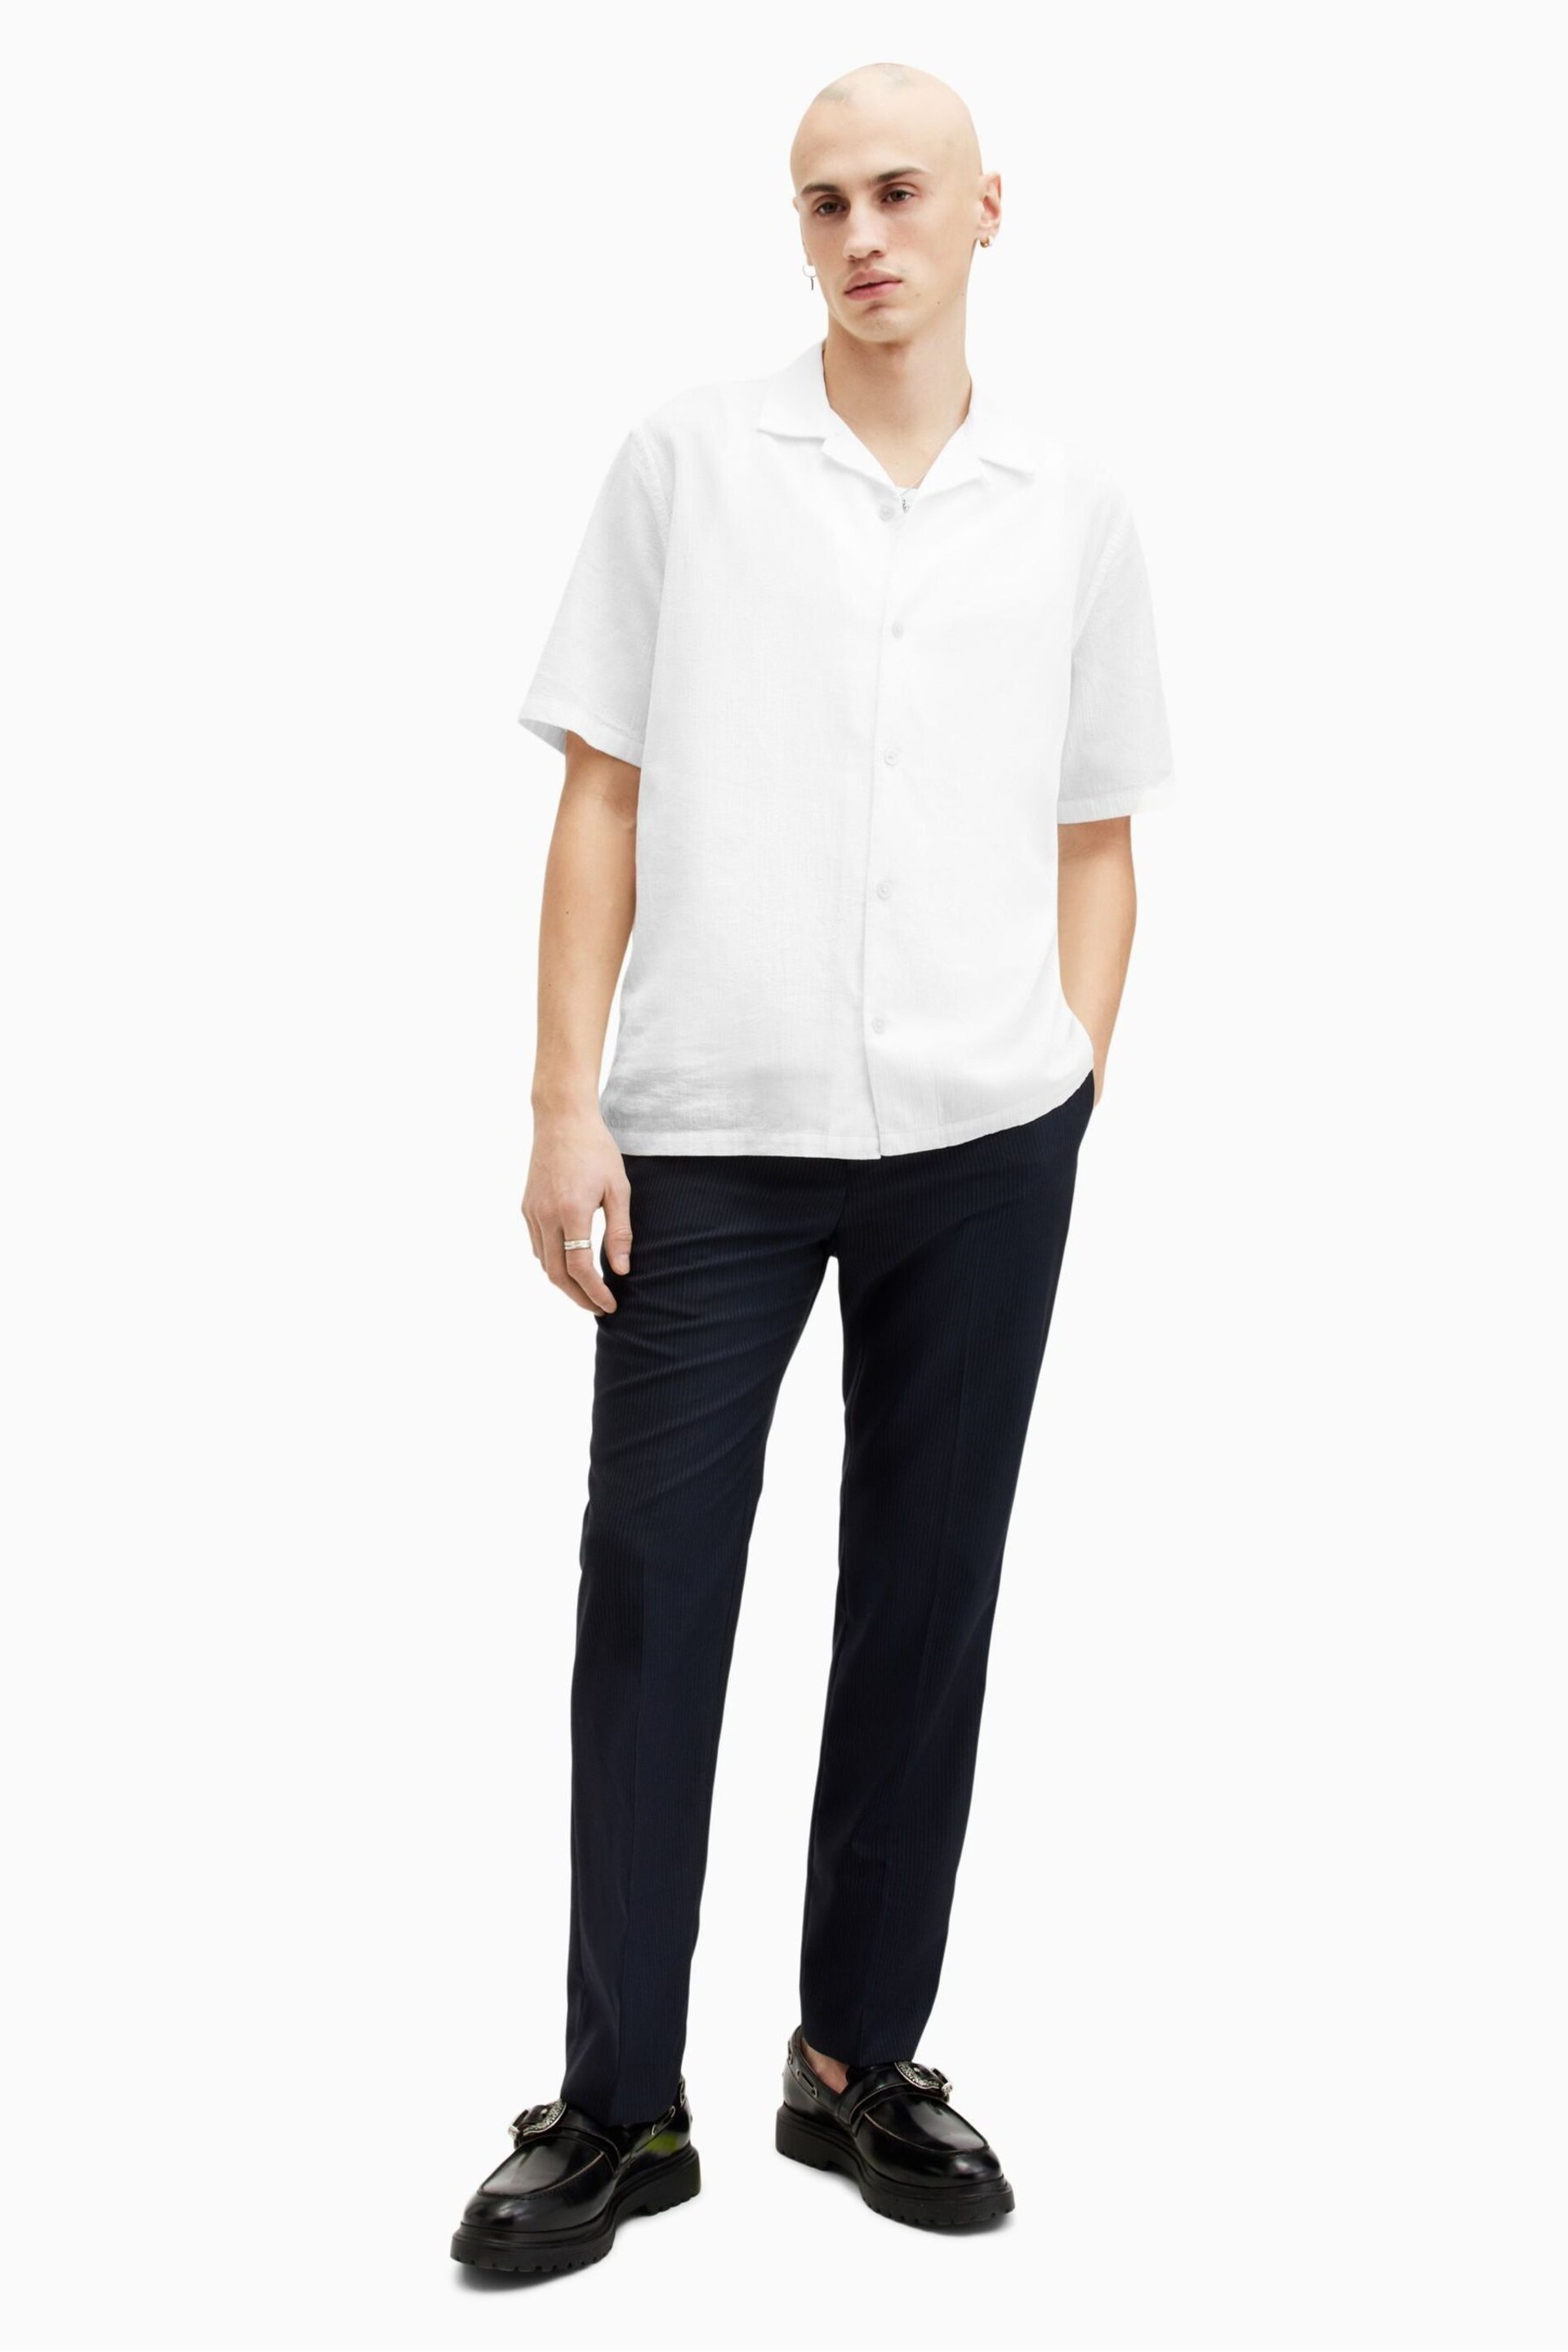 AllSaints White Valley Shirt - Image 4 of 7